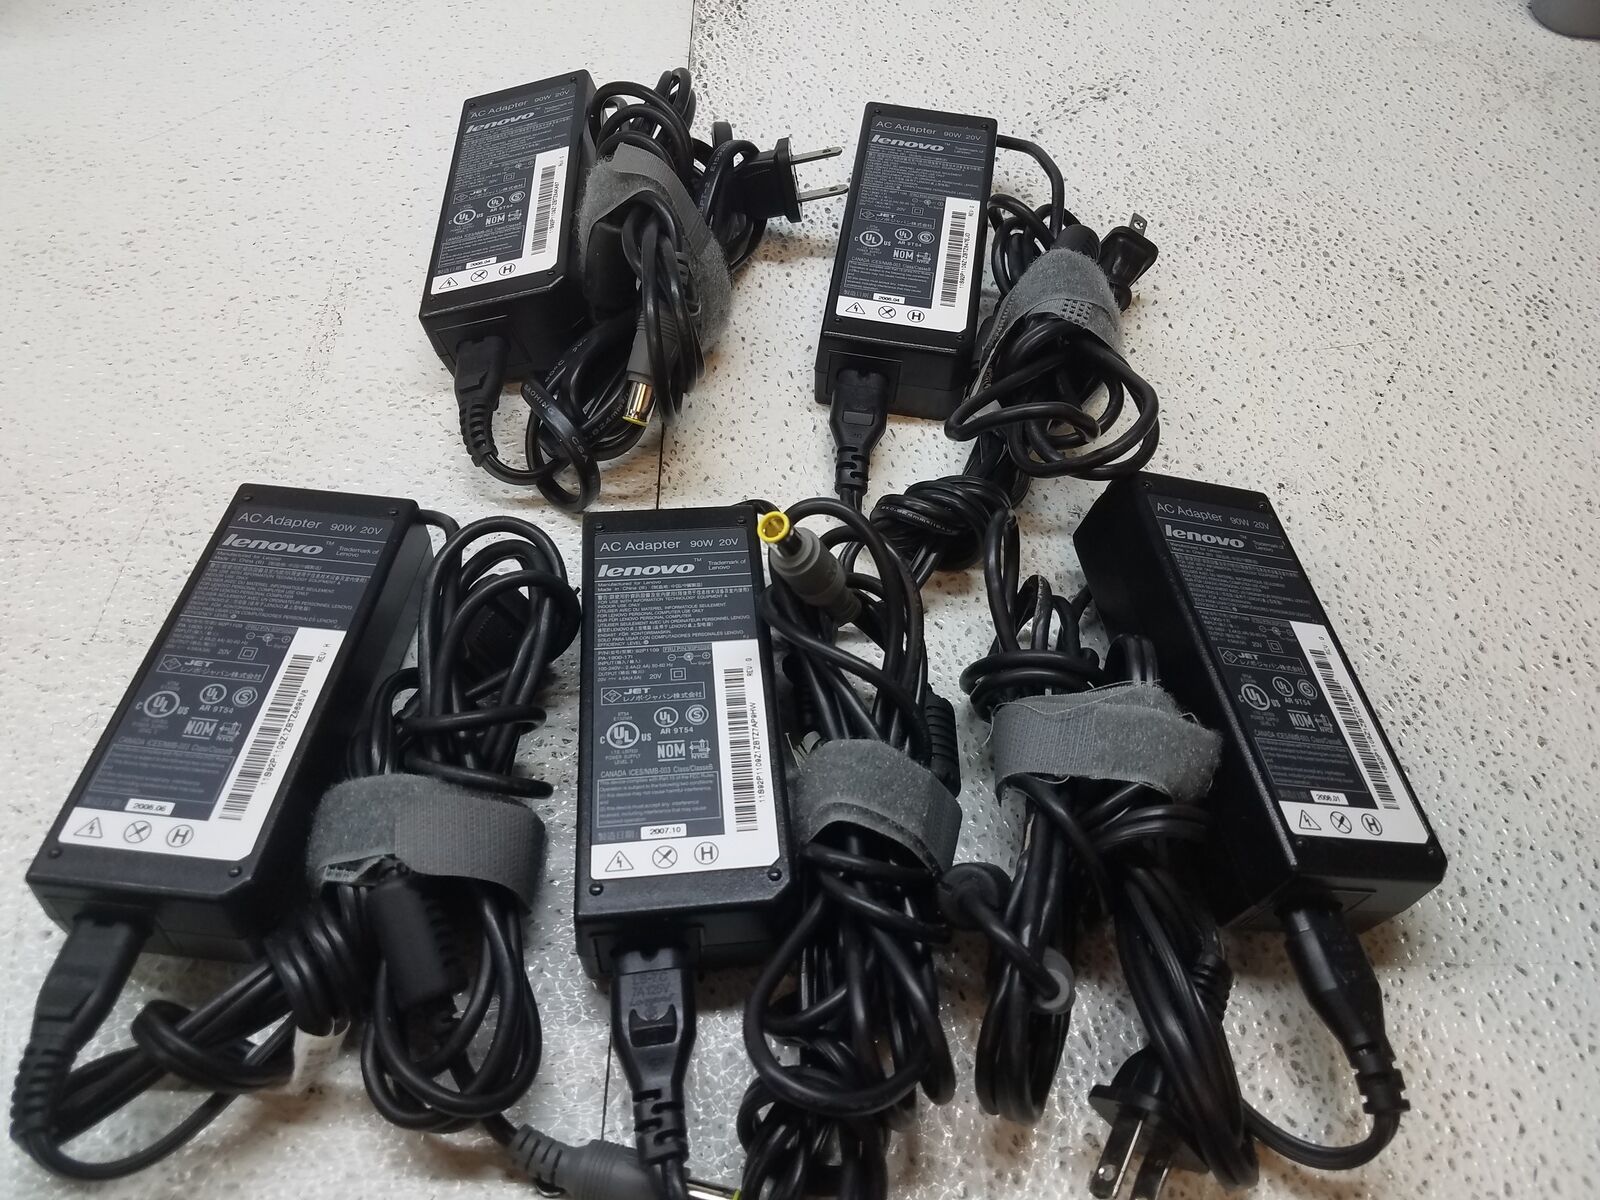 Lot of 5 Genuine Lenovo 90W 20V Laptop Power Adapter Chargers 92P1109 w/ Cables